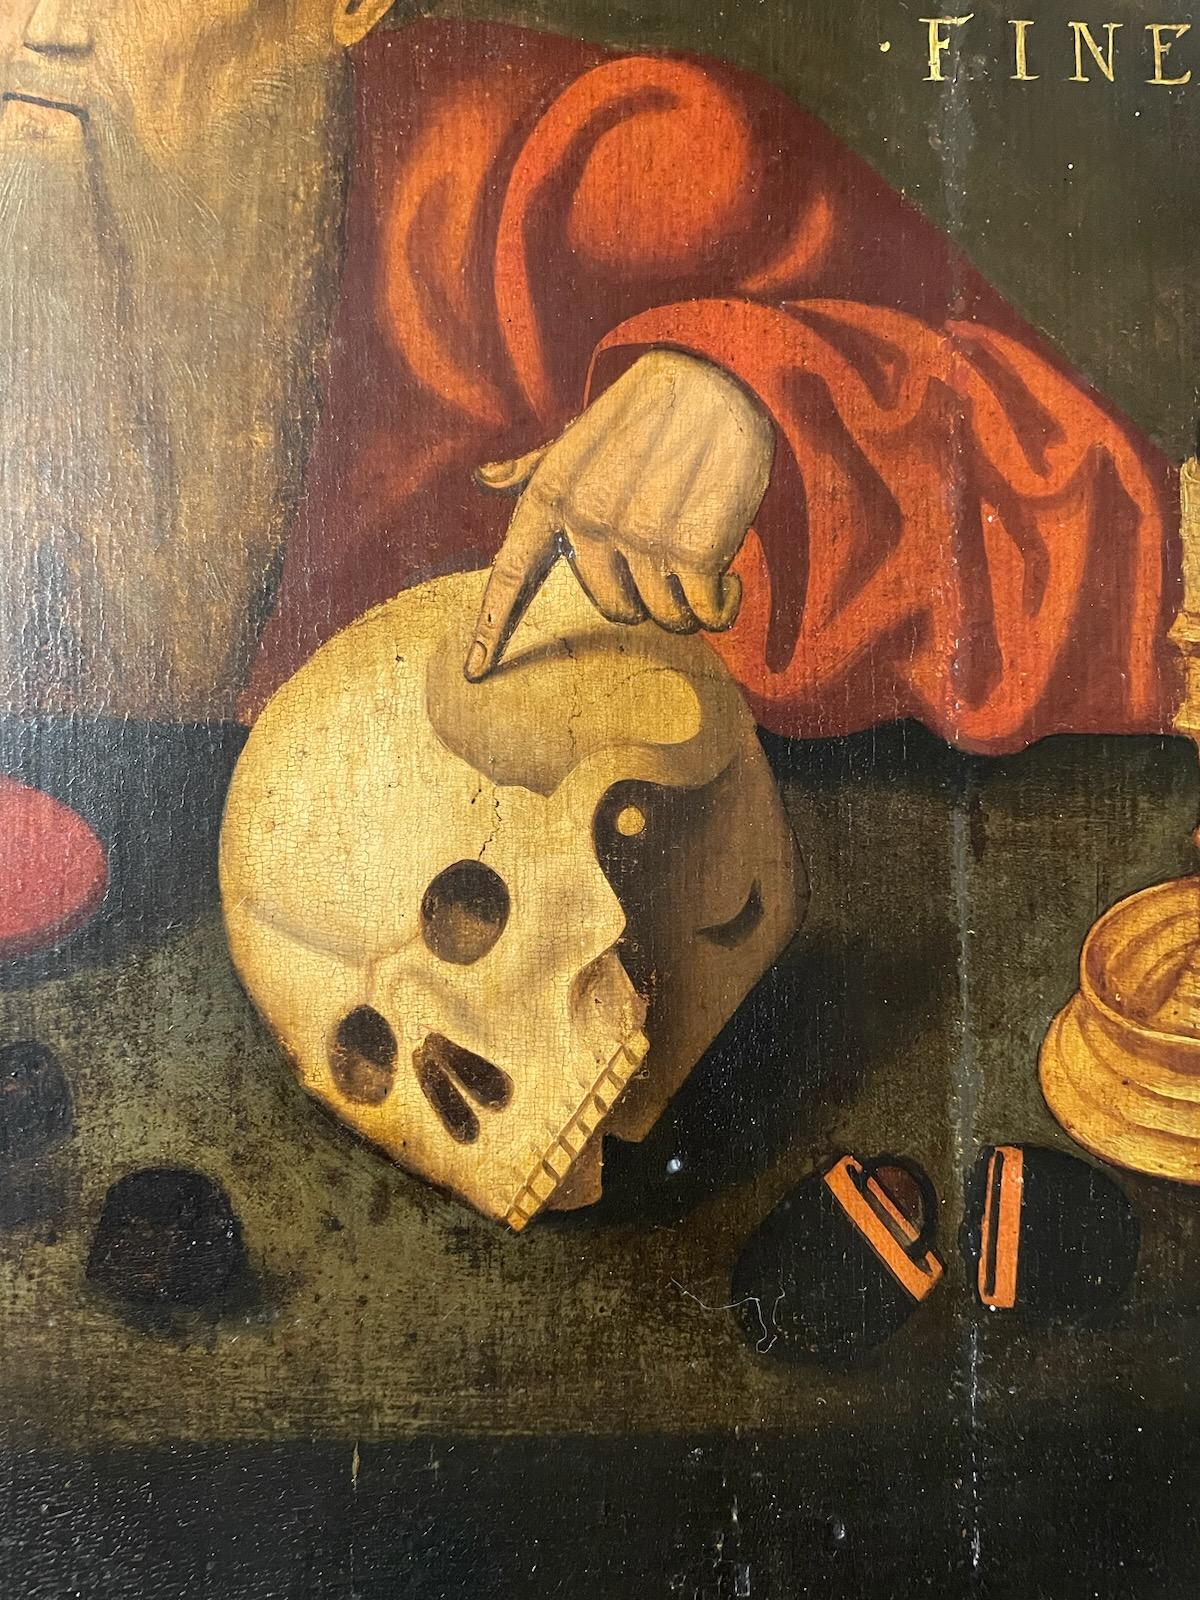 Flemish School, believed to be from the 16th century according to previous owner. Oil on panel depicting Saint Jerome seated in his study with various instruments and symbols around himself, including a skull acting as a memento mori. This portrayal